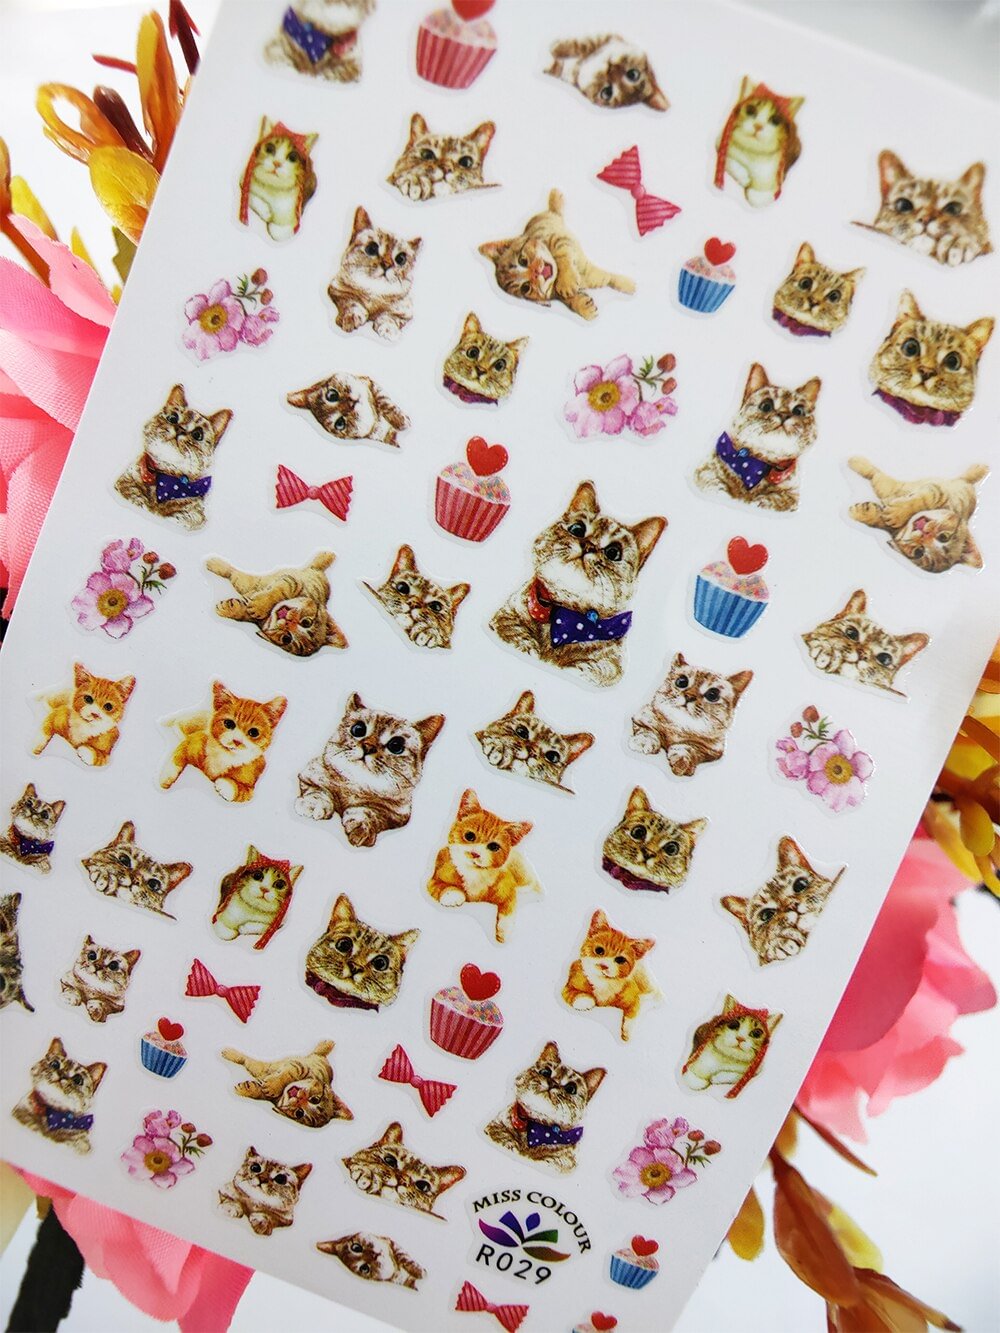 Nail Sticker Art 3D Naughty Cat Pets Cake Bow Self Adhesive Stickers for Nails Decoraciones foil Manicure Sliders Accesorios